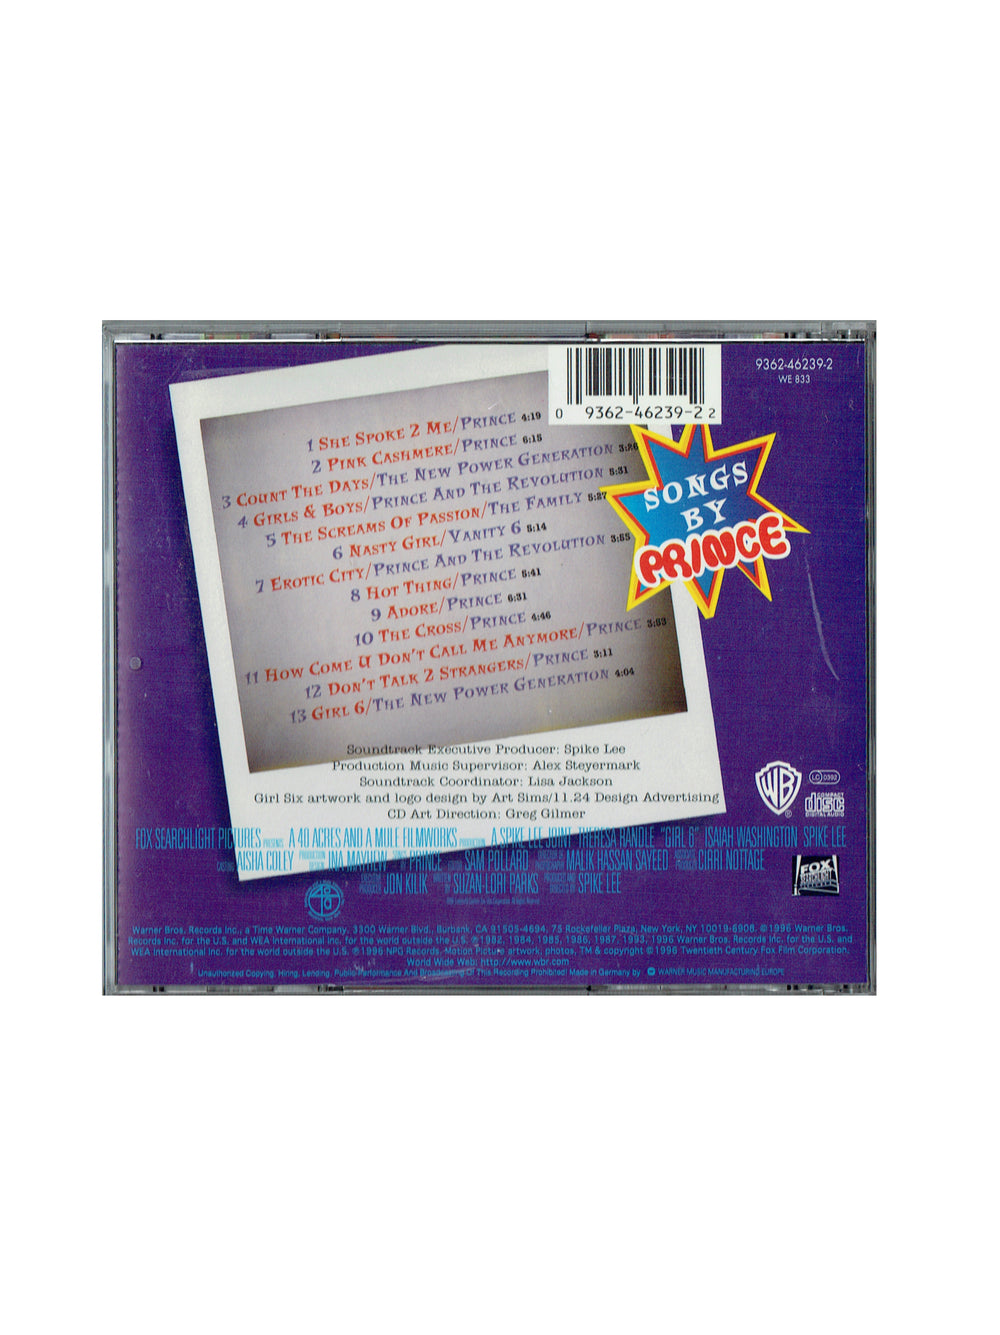 Girl 6 Soundtrack Songs By Prince CD Album EU Release GREAT TRACKS HYPE STICKER